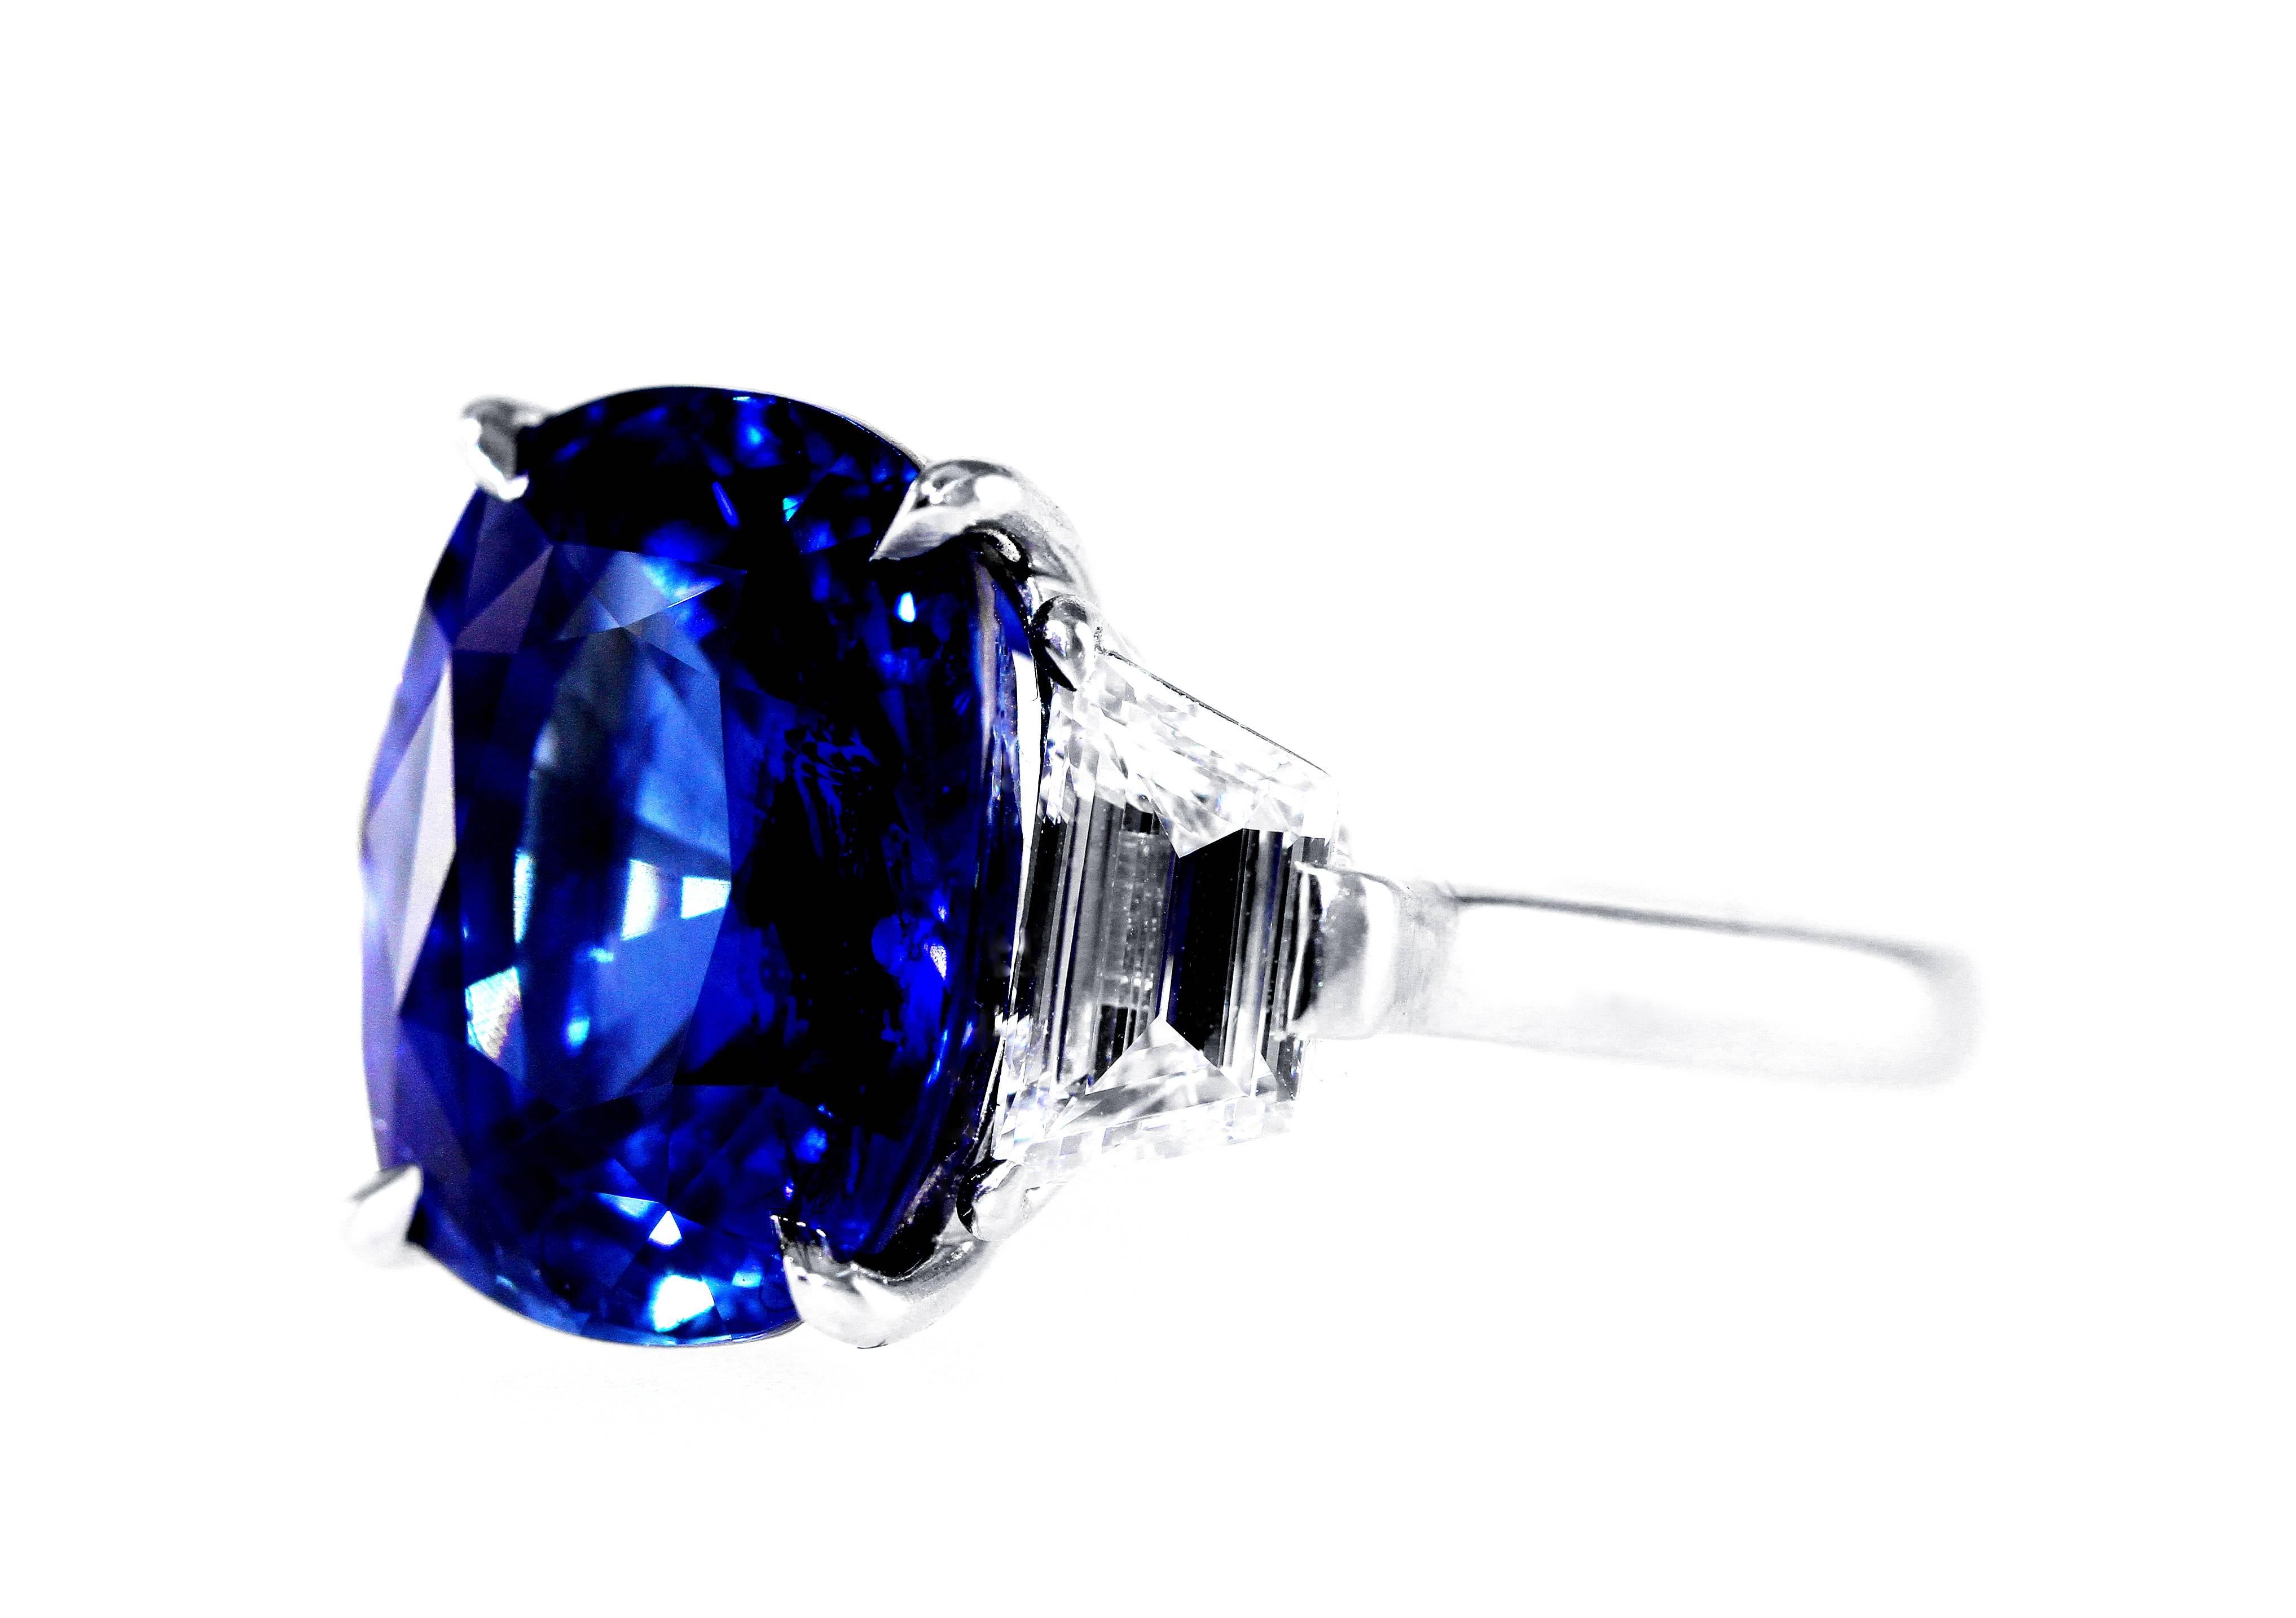 A superb platinum, sapphire and diamond ring, set in the center with an oval sapphire weighing 12.65 carats, flanked by 2 trapeze-cut diamonds weighing approximately 1.60 carats, gross weight 11.2 grams, measuring 3/4 by 5/8 by 1 1/8 inches, size 6